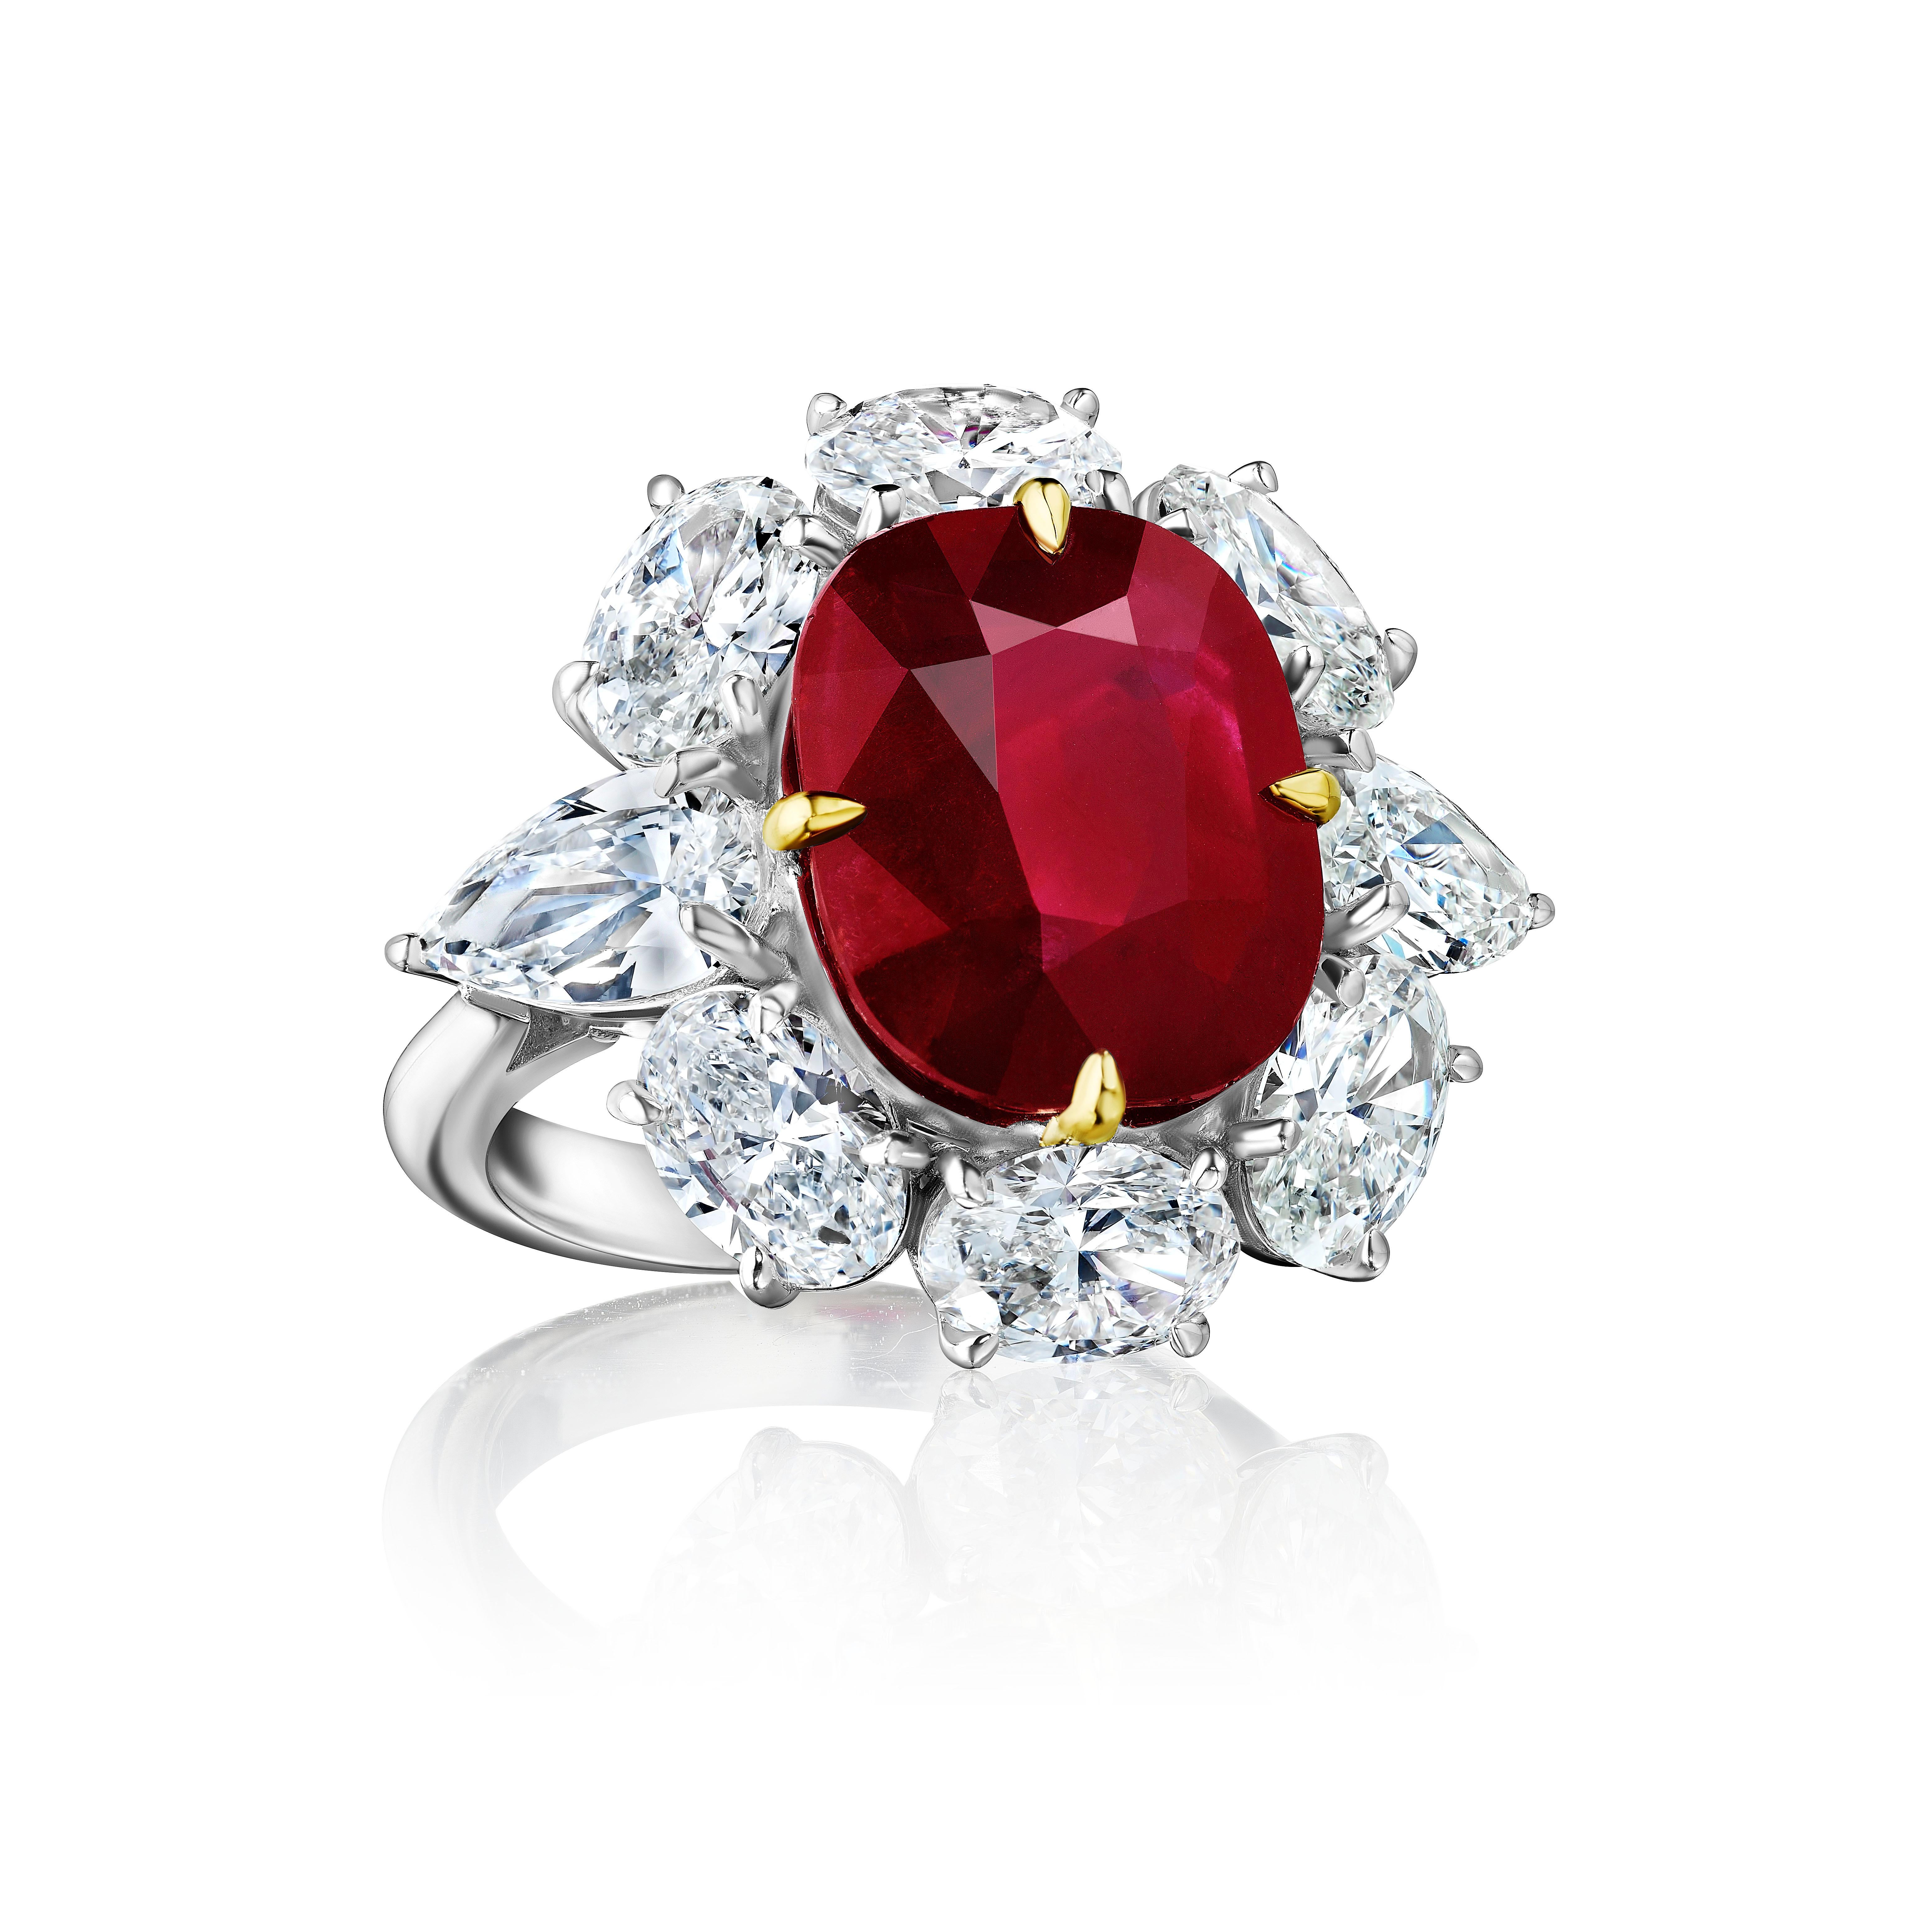 True Collectors Ruby

Cushion Cut Ruby weighing 6.55 Carats, certified by AGL as unheated and from the mine of Myanmar or widely known as Burma.
Burmese Rubies of this size and provenance are especially hard to come by. This Stones cutting and pure